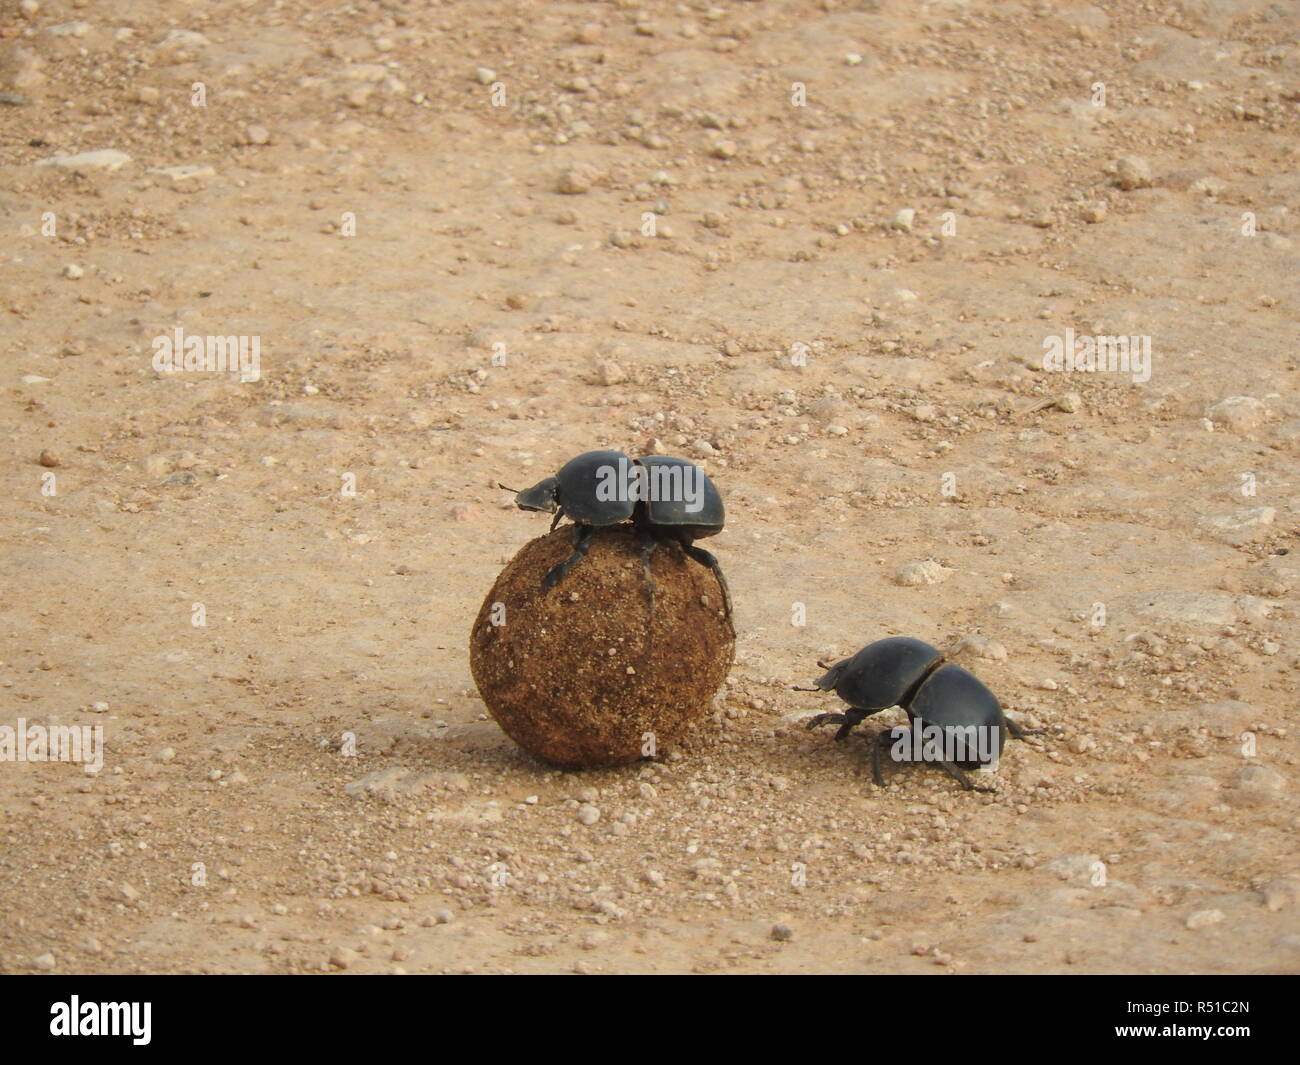 elephant dung beetles at work rolling dung Stock Photo